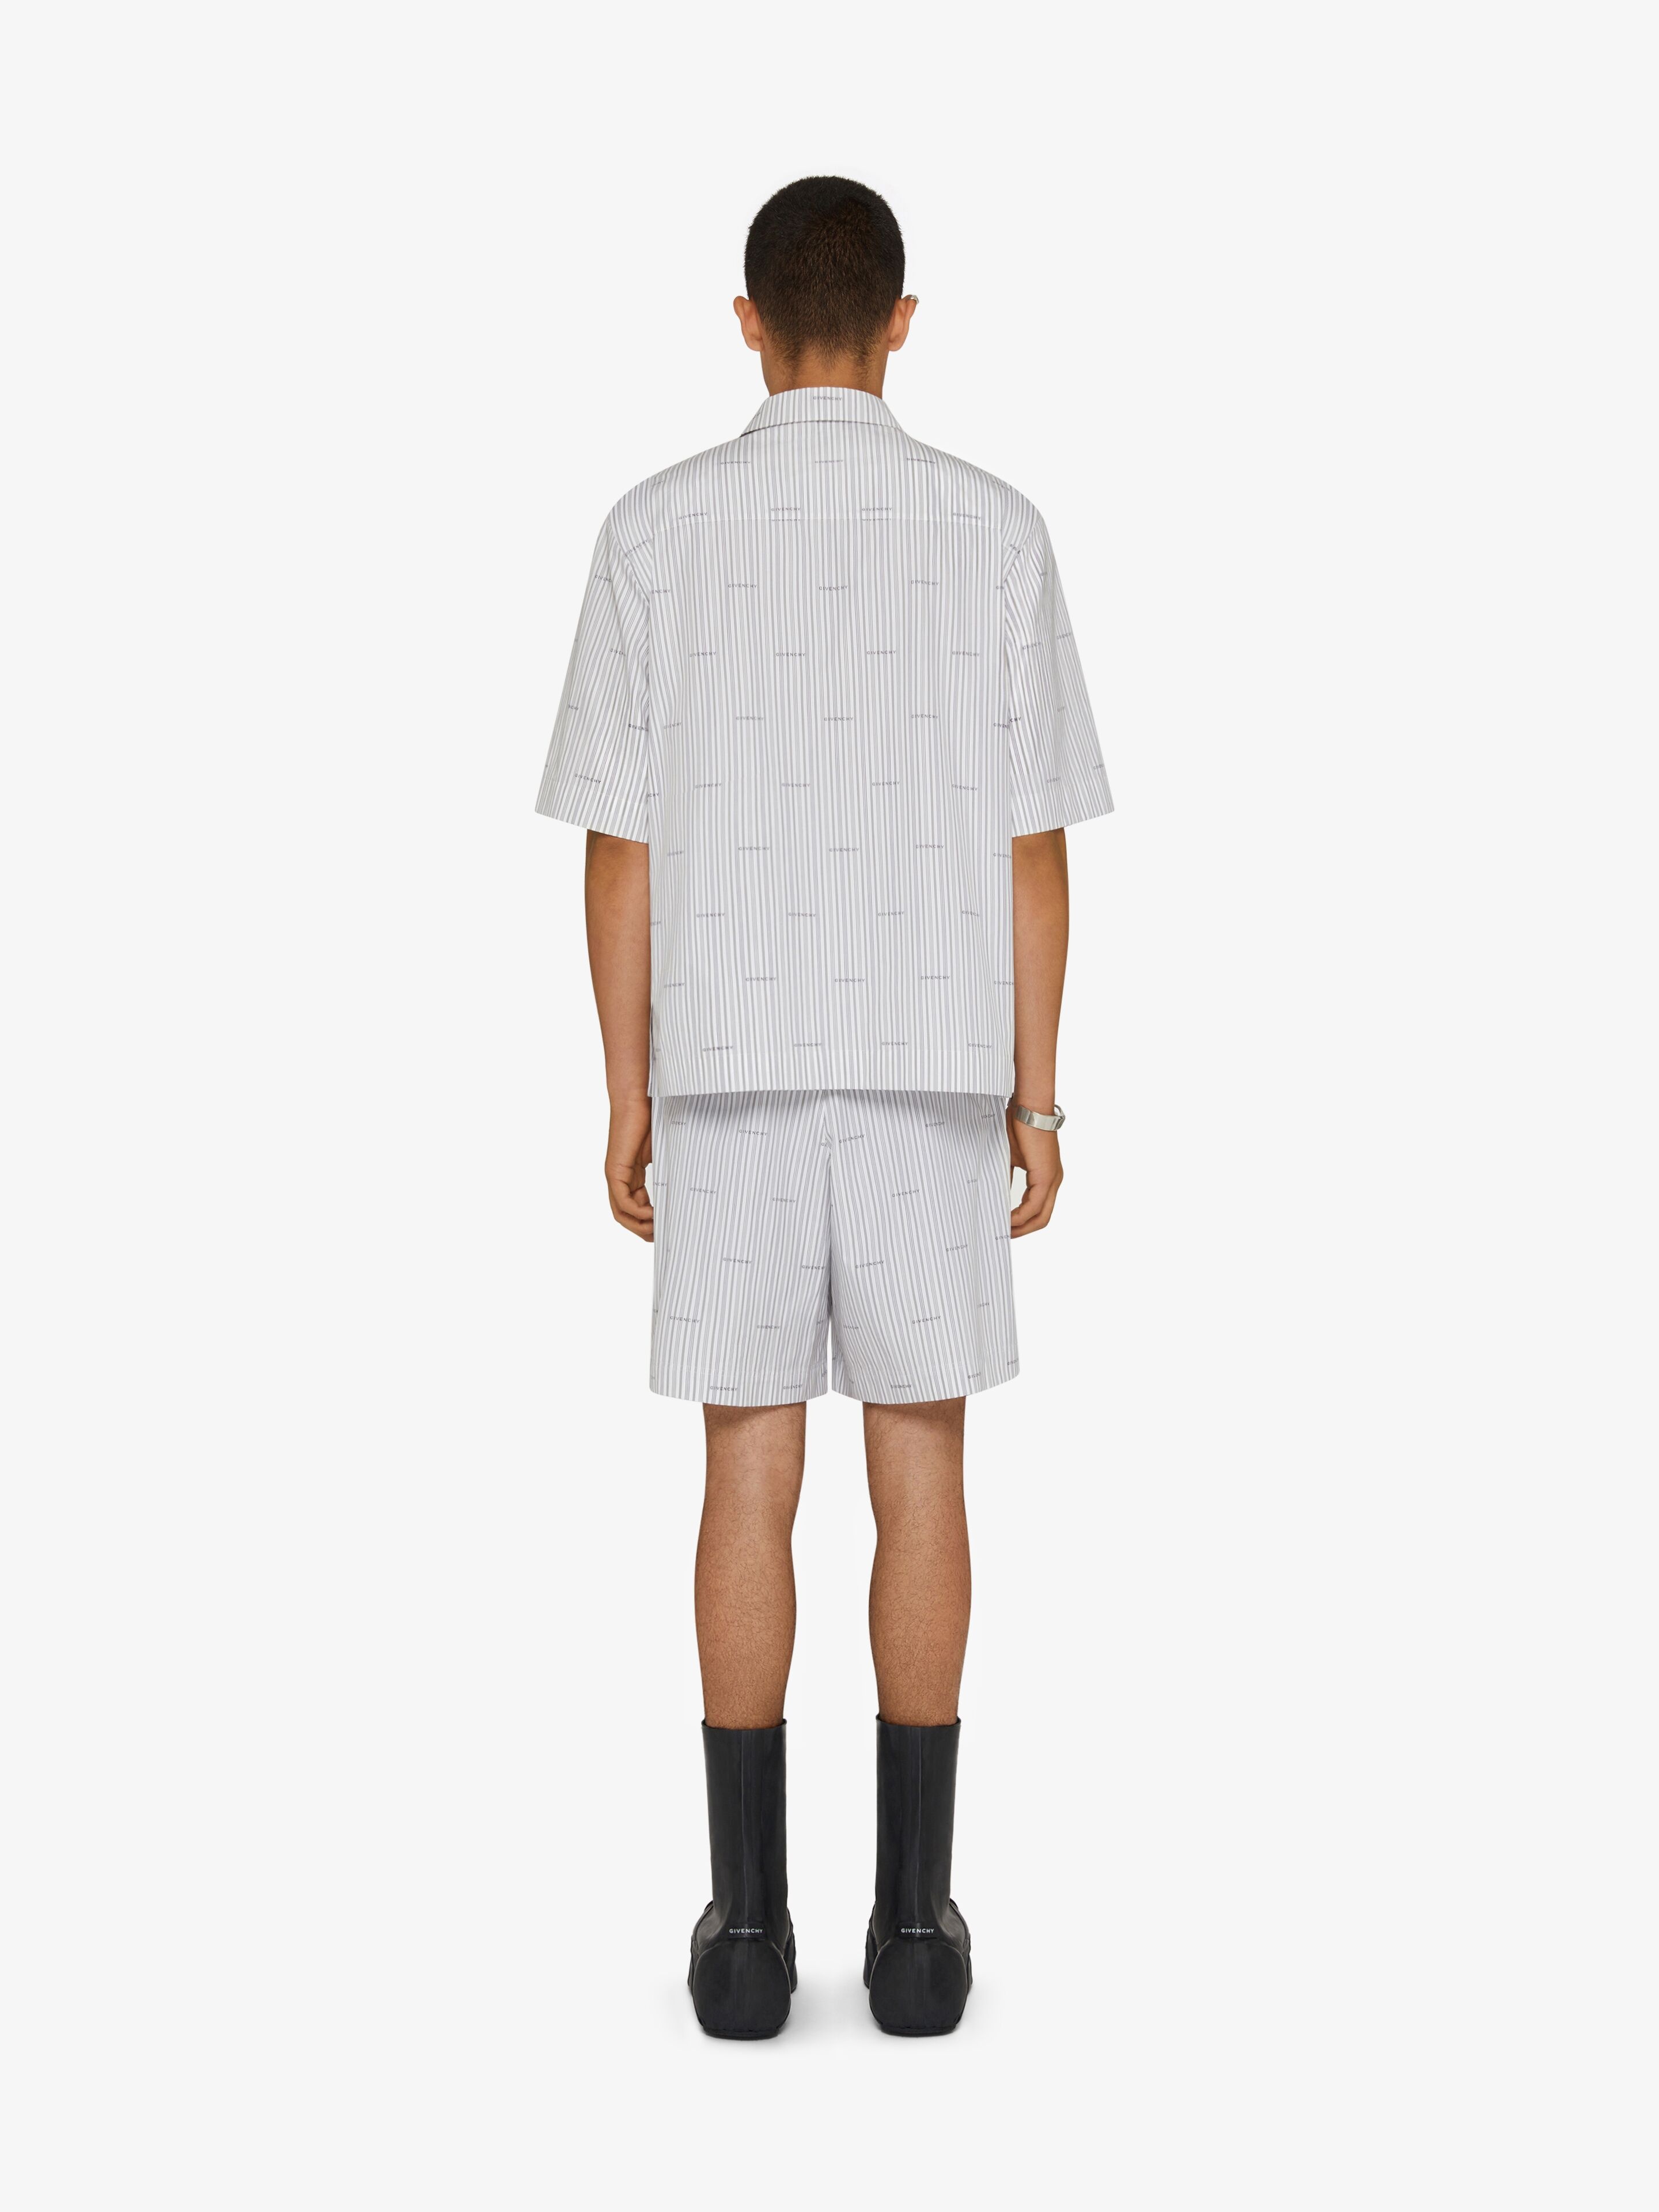 GIVENCHY BERMUDA SHORTS IN POPLIN WITH STRIPES - 4